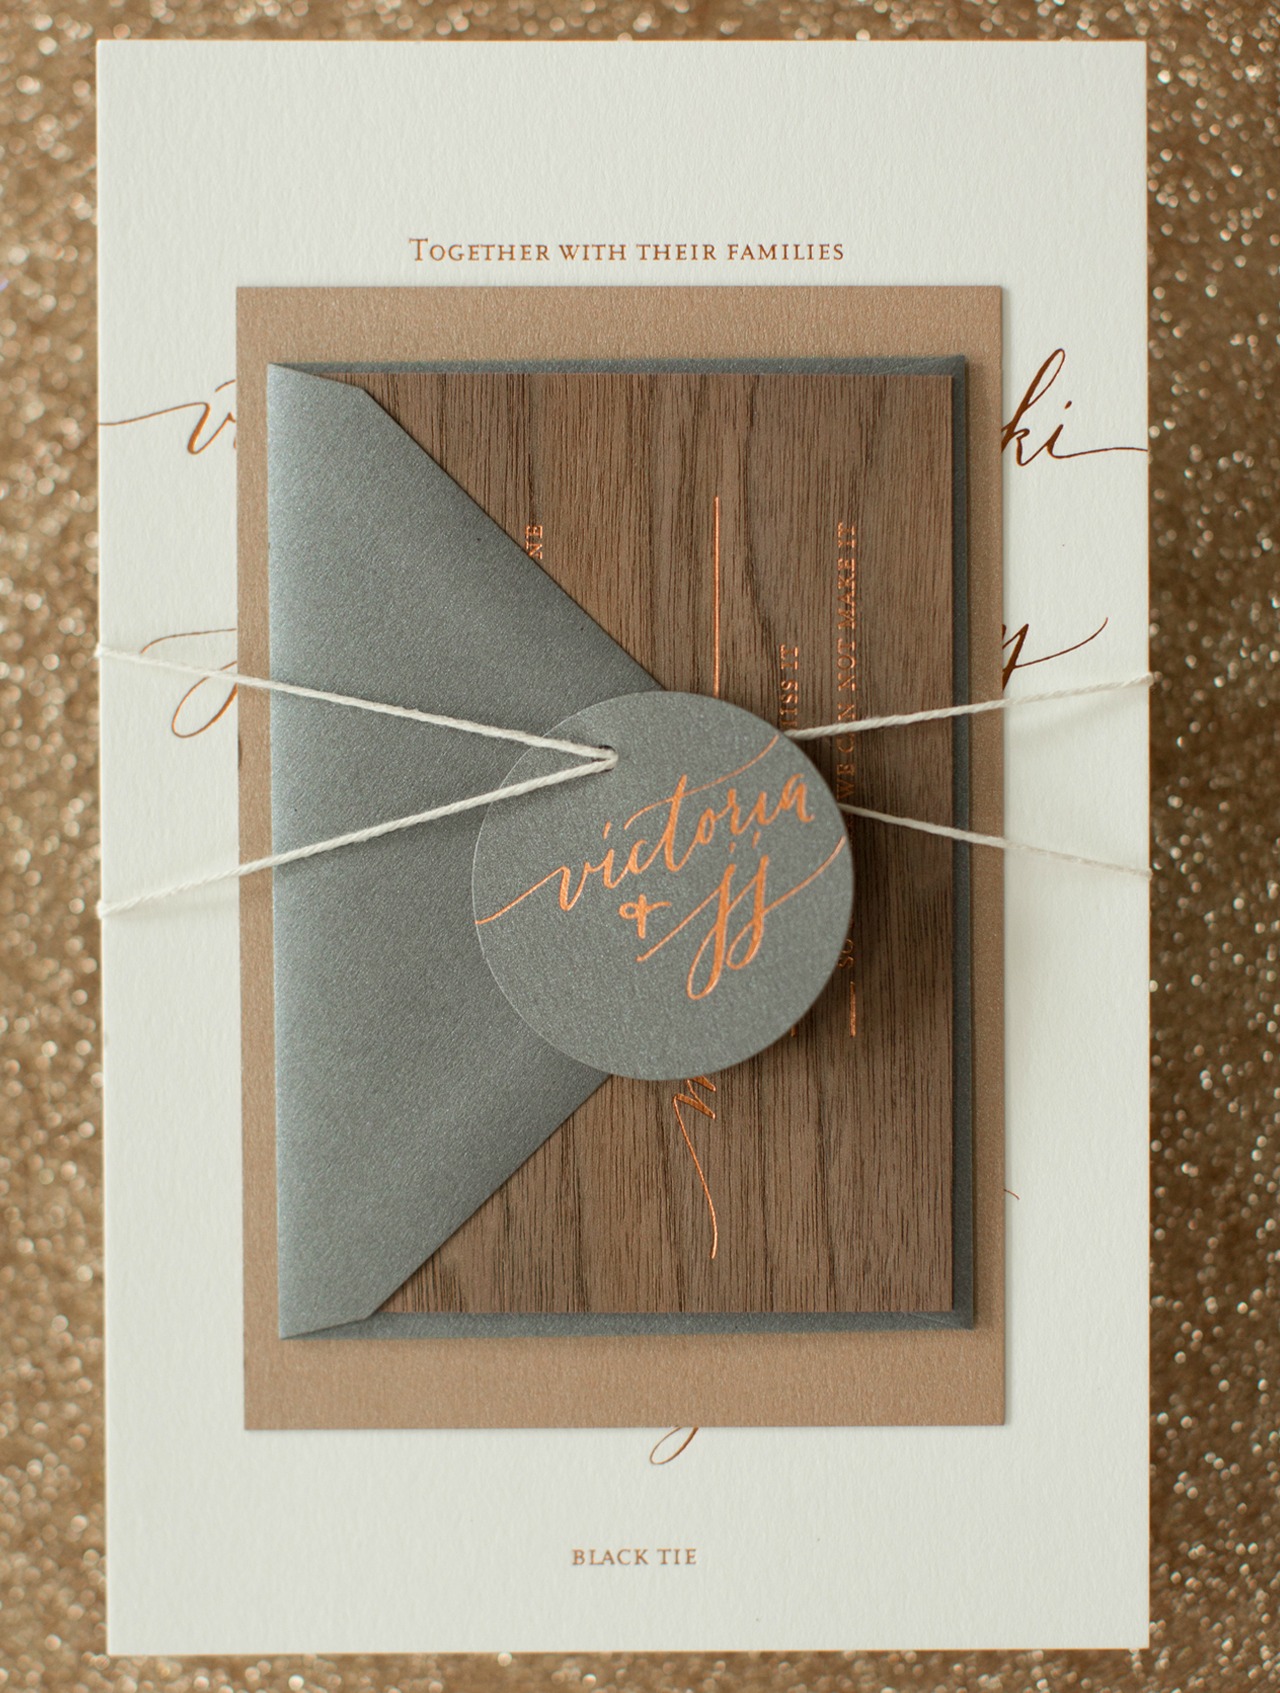 Rustic Boho Wood and Copper Foil Wedding Invitations by Atheneum Creative